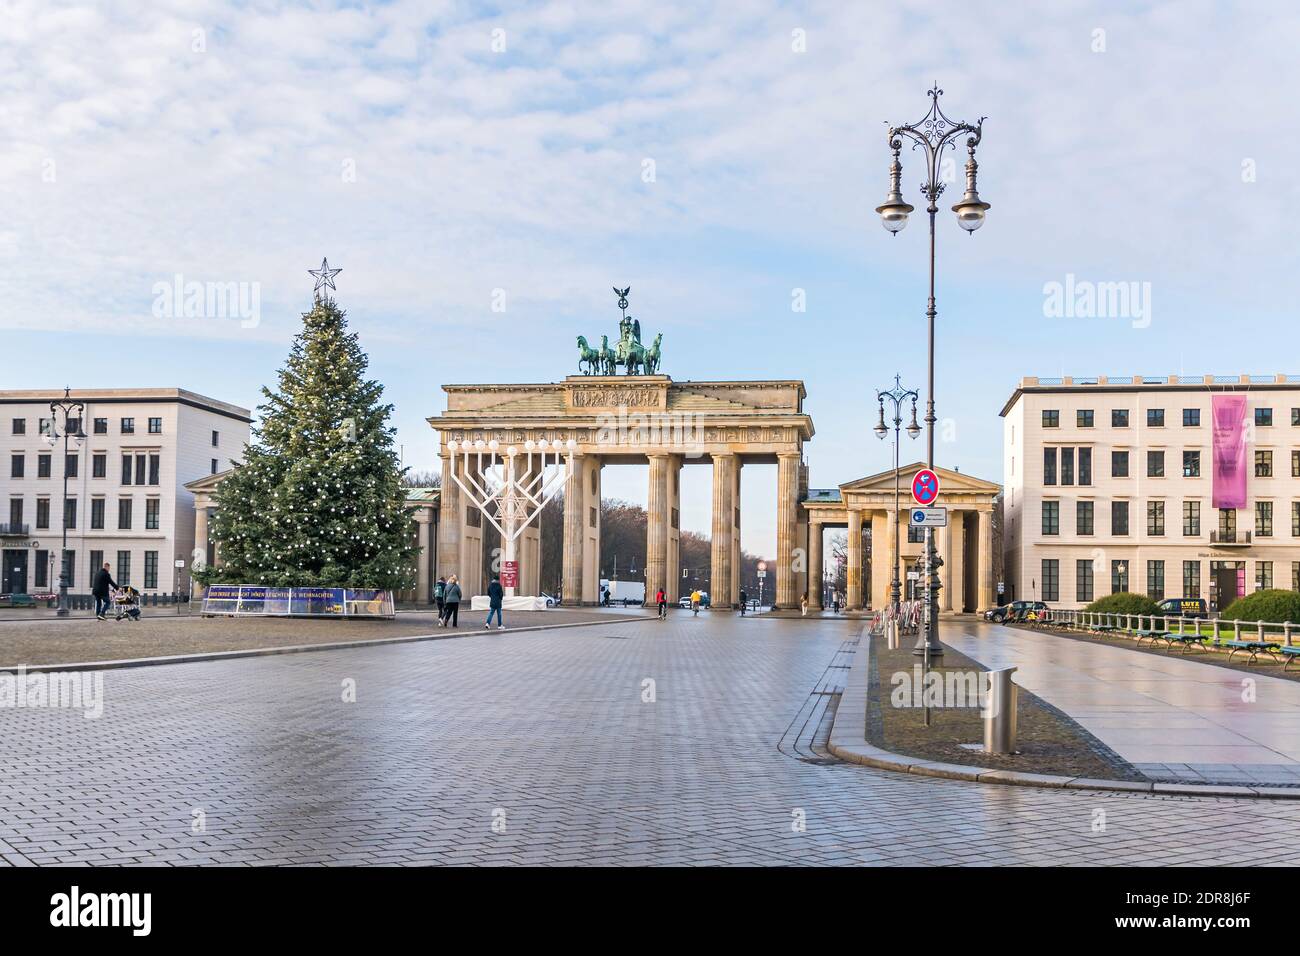 Berlin, Germany - December 18, 2020: Historic square Pariser Platz with the Brandenburg Gate, largest Hanukkah candlestick in Europe and a decorated C Stock Photo